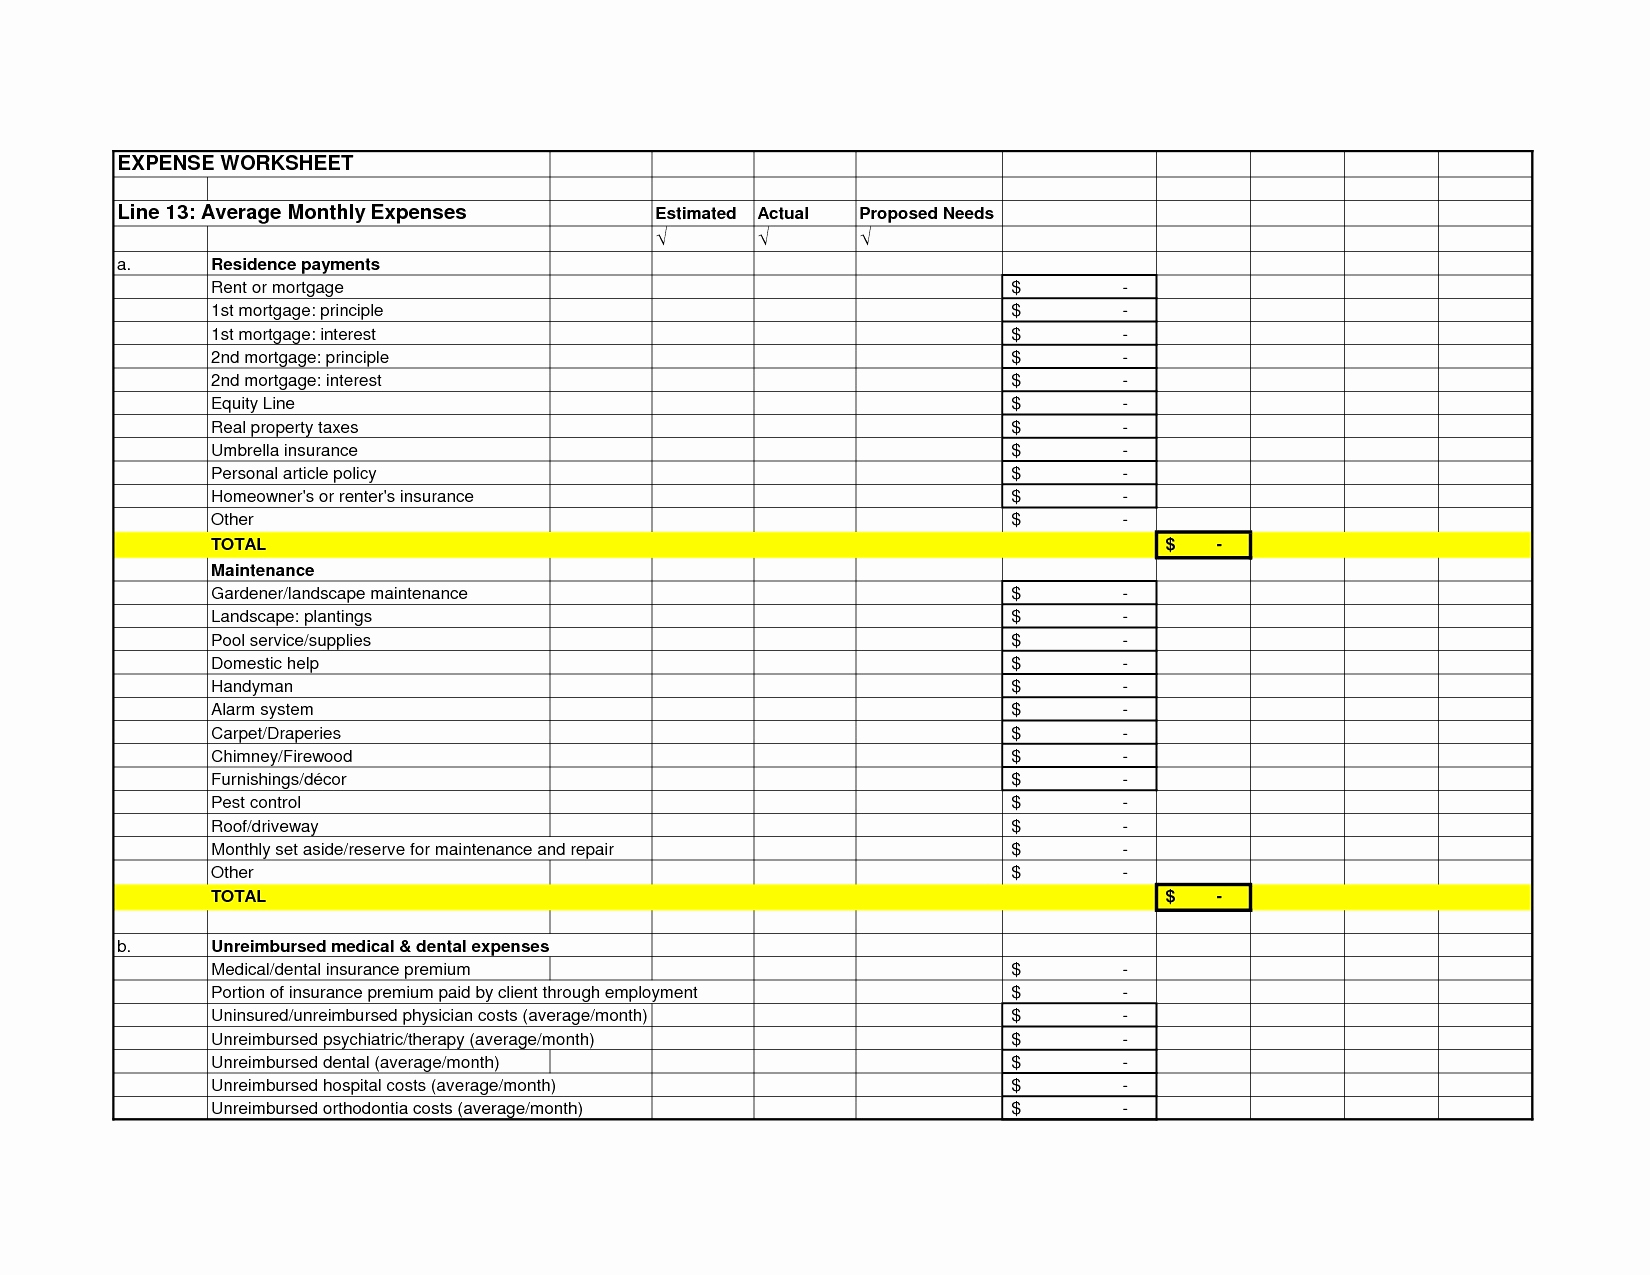 50 Luxury Real Estate Client Tracking Spreadsheet - Documents Ideas intended for Insurance Sales Tracking Spreadsheet